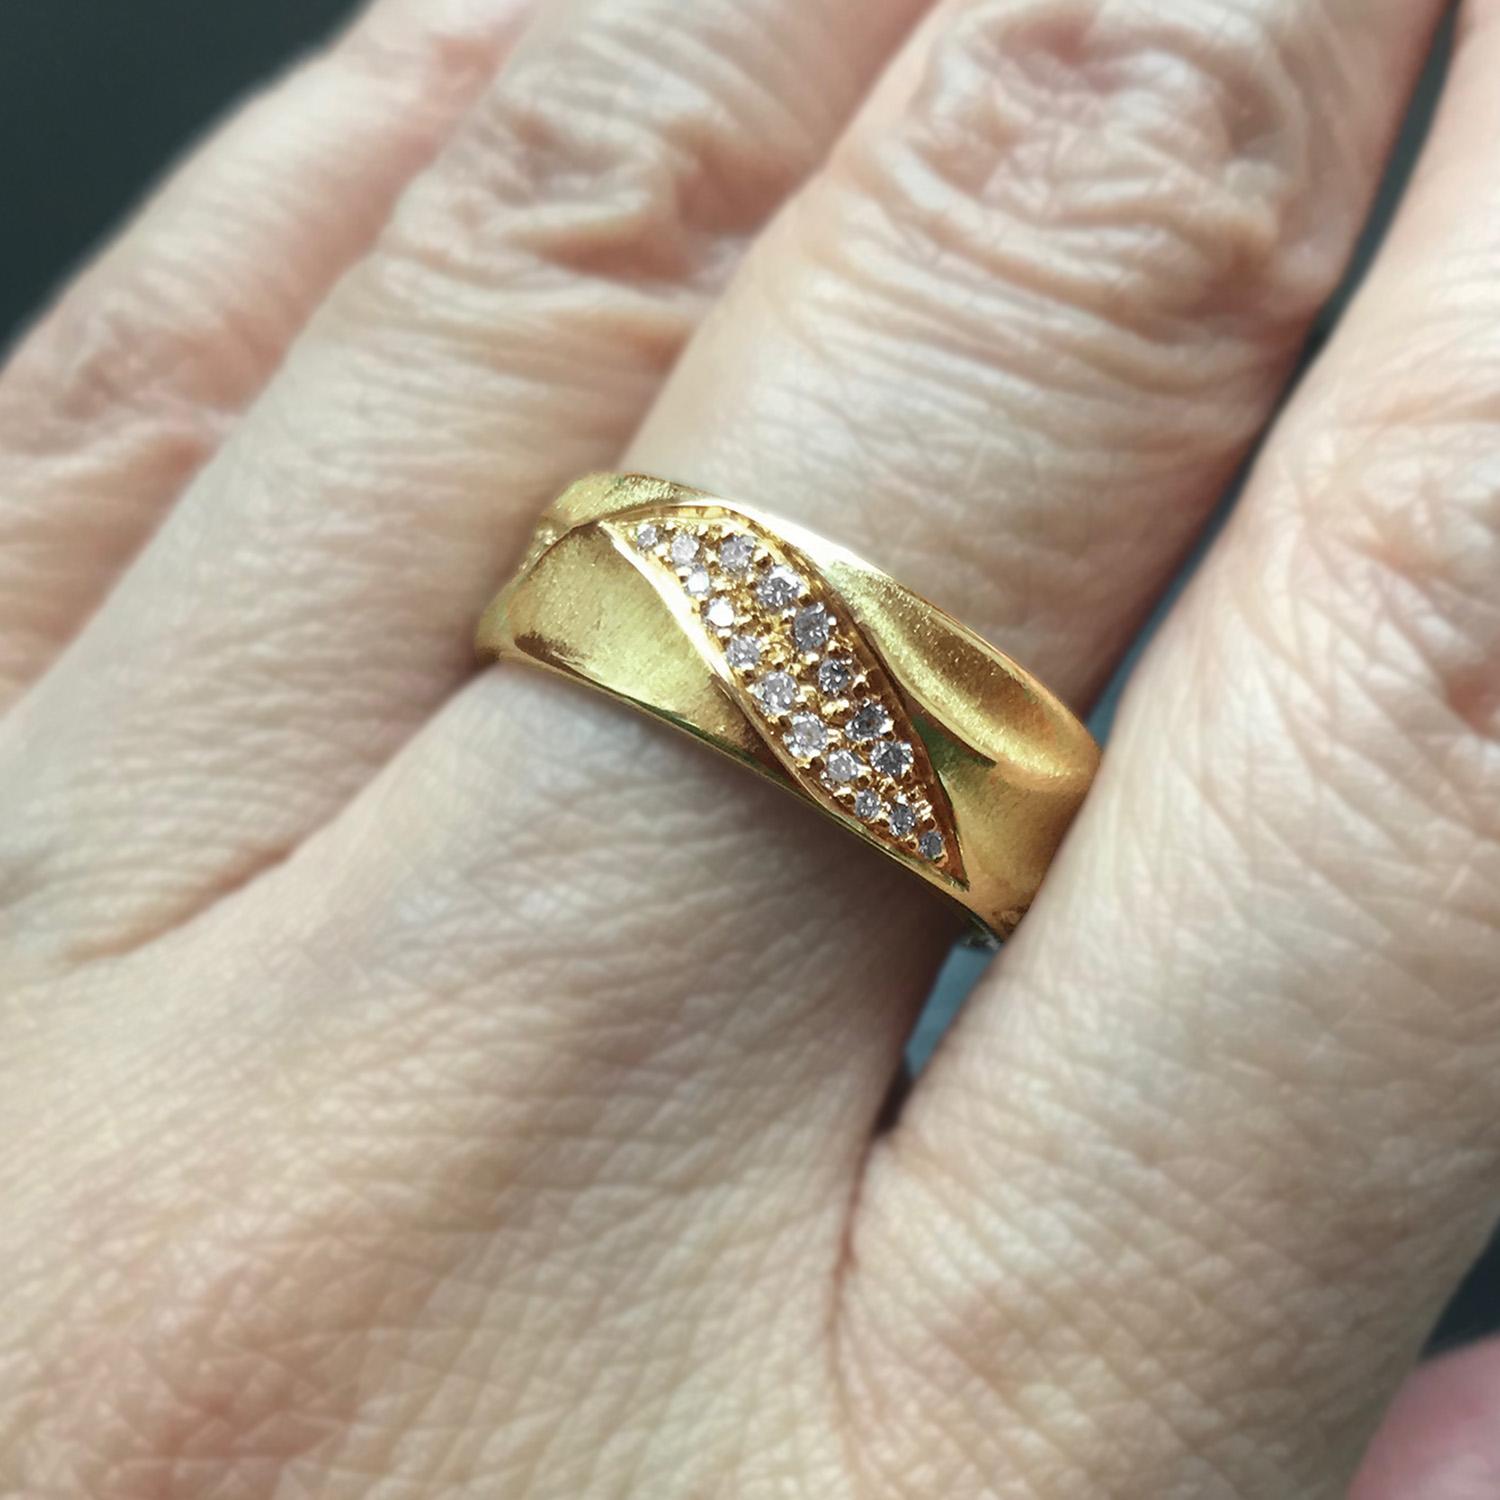 For Sale:  Small 18 Karat Yellow Gold Eternal Dune Band Ring with Diamonds from Keiko Mita 3